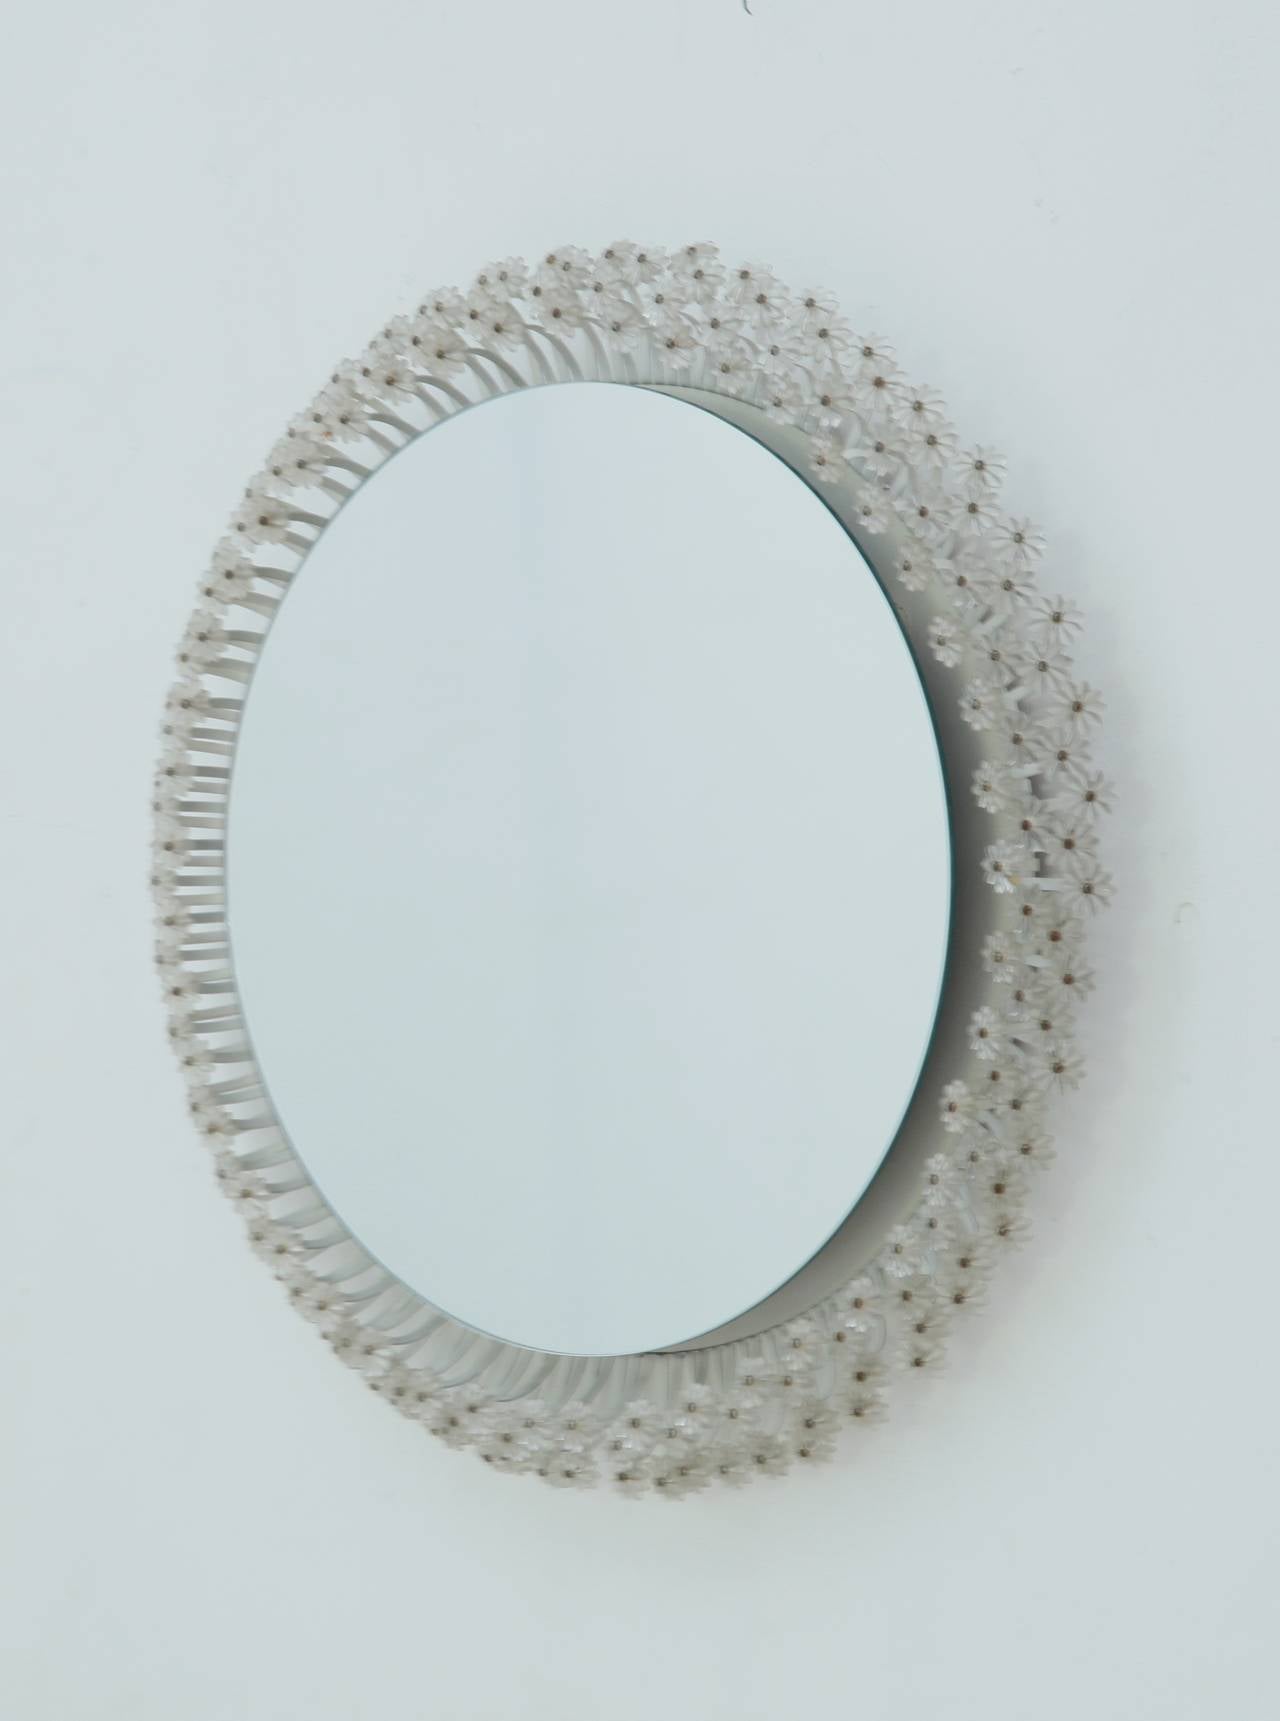 A round wall mirror with a circular tube light behind it. The mirror is surrounded with daisy-like ornaments, made of lacquered steel and plexiglass.
This mirror was designed for a cafe in Vienna in 1955.